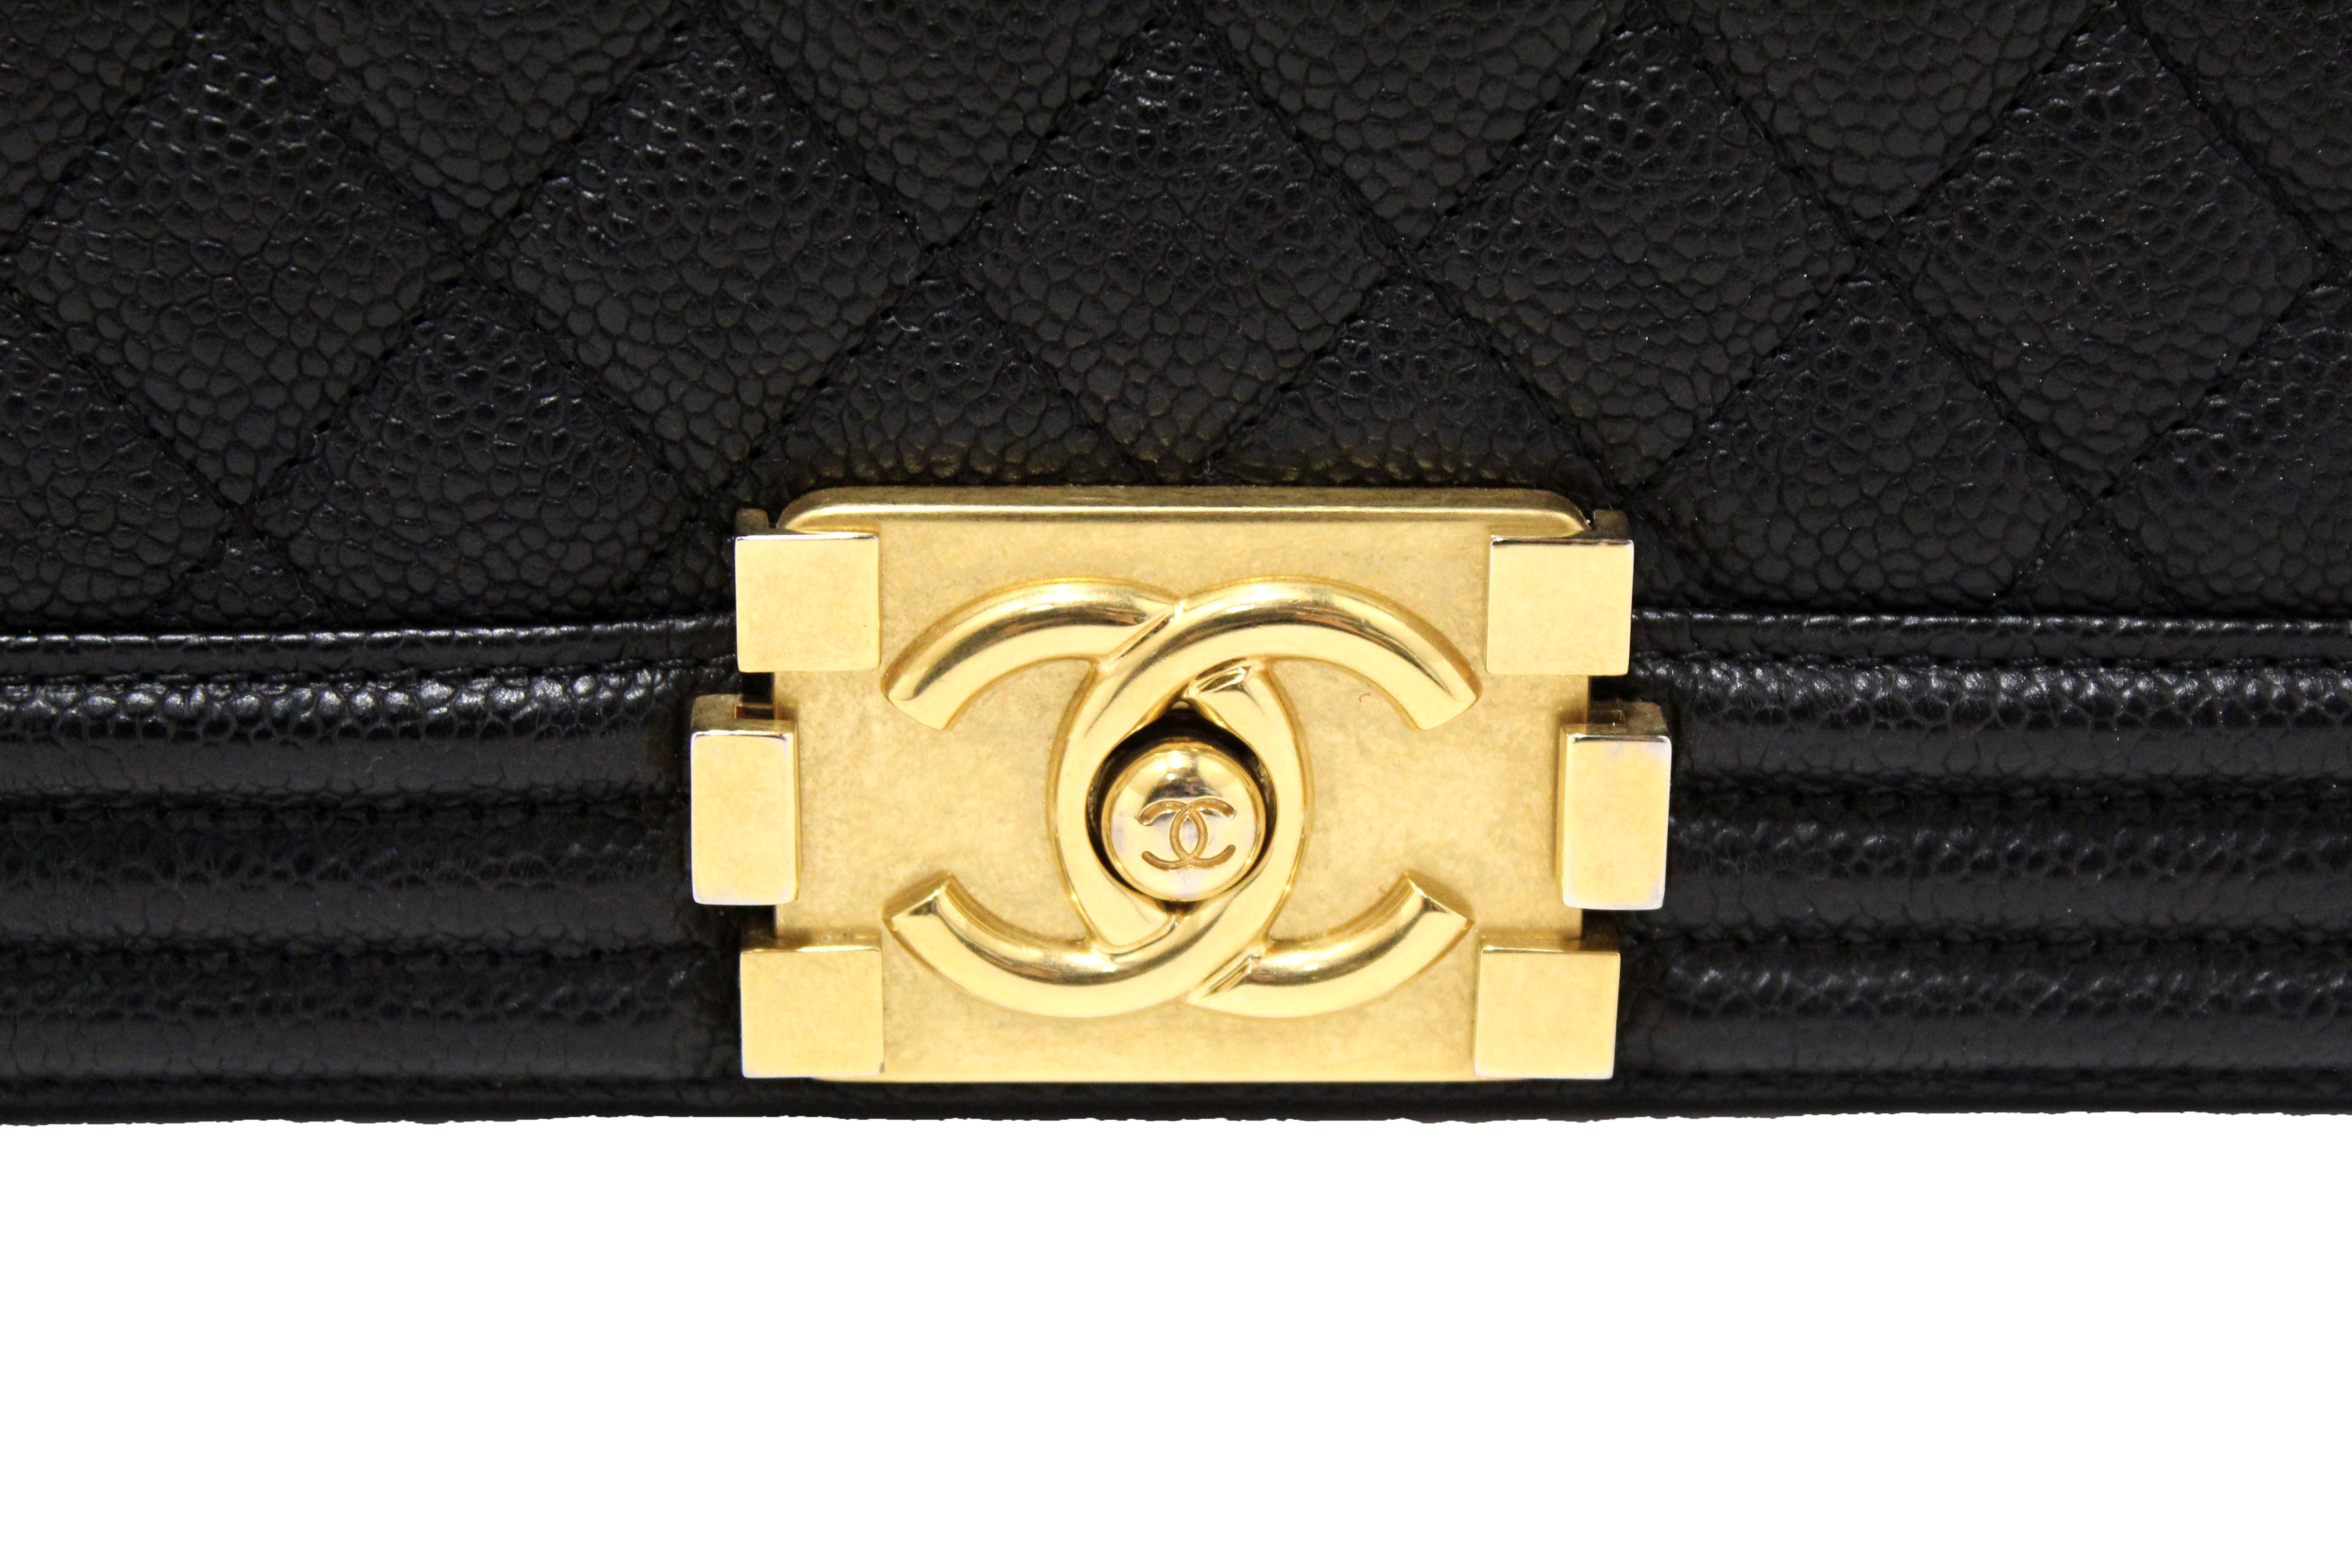 Authentic Chanel Black Quilted Caviar Leather New Medium Boy Shoulder Bag